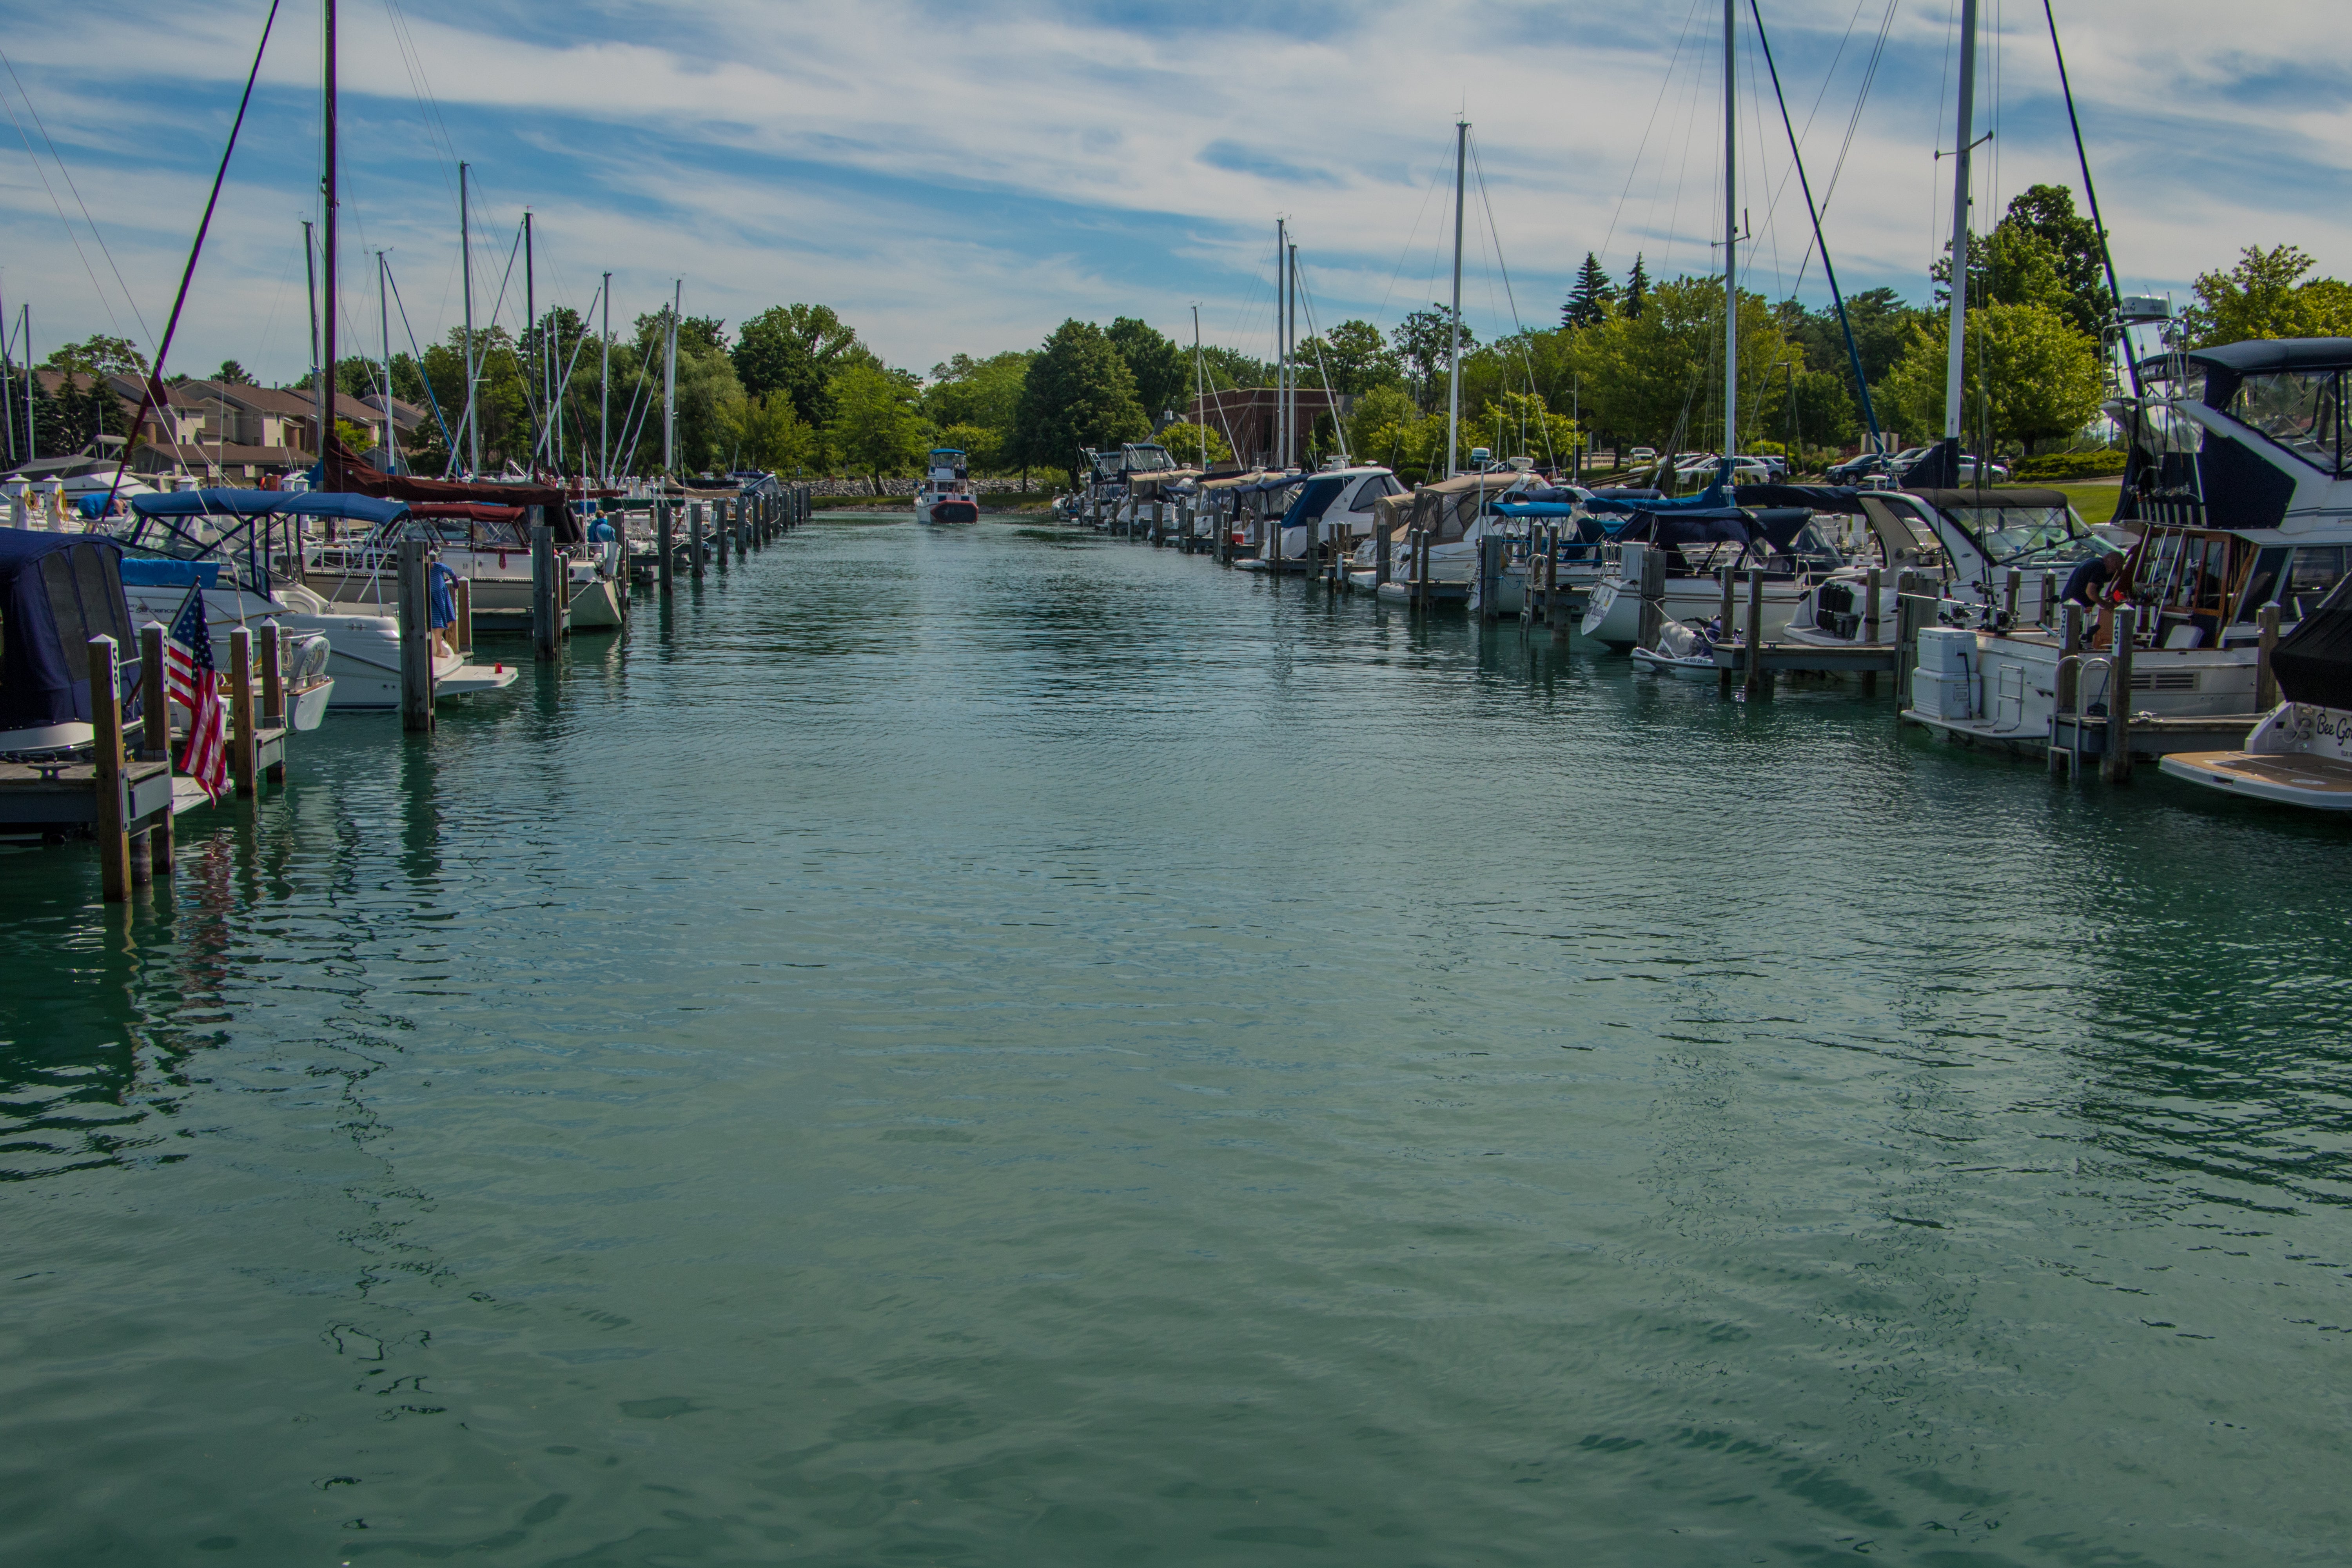 Just a few minutes drive, or a nice walk, you can get to the Elk Rapids marina on Grand Traverse Bay.